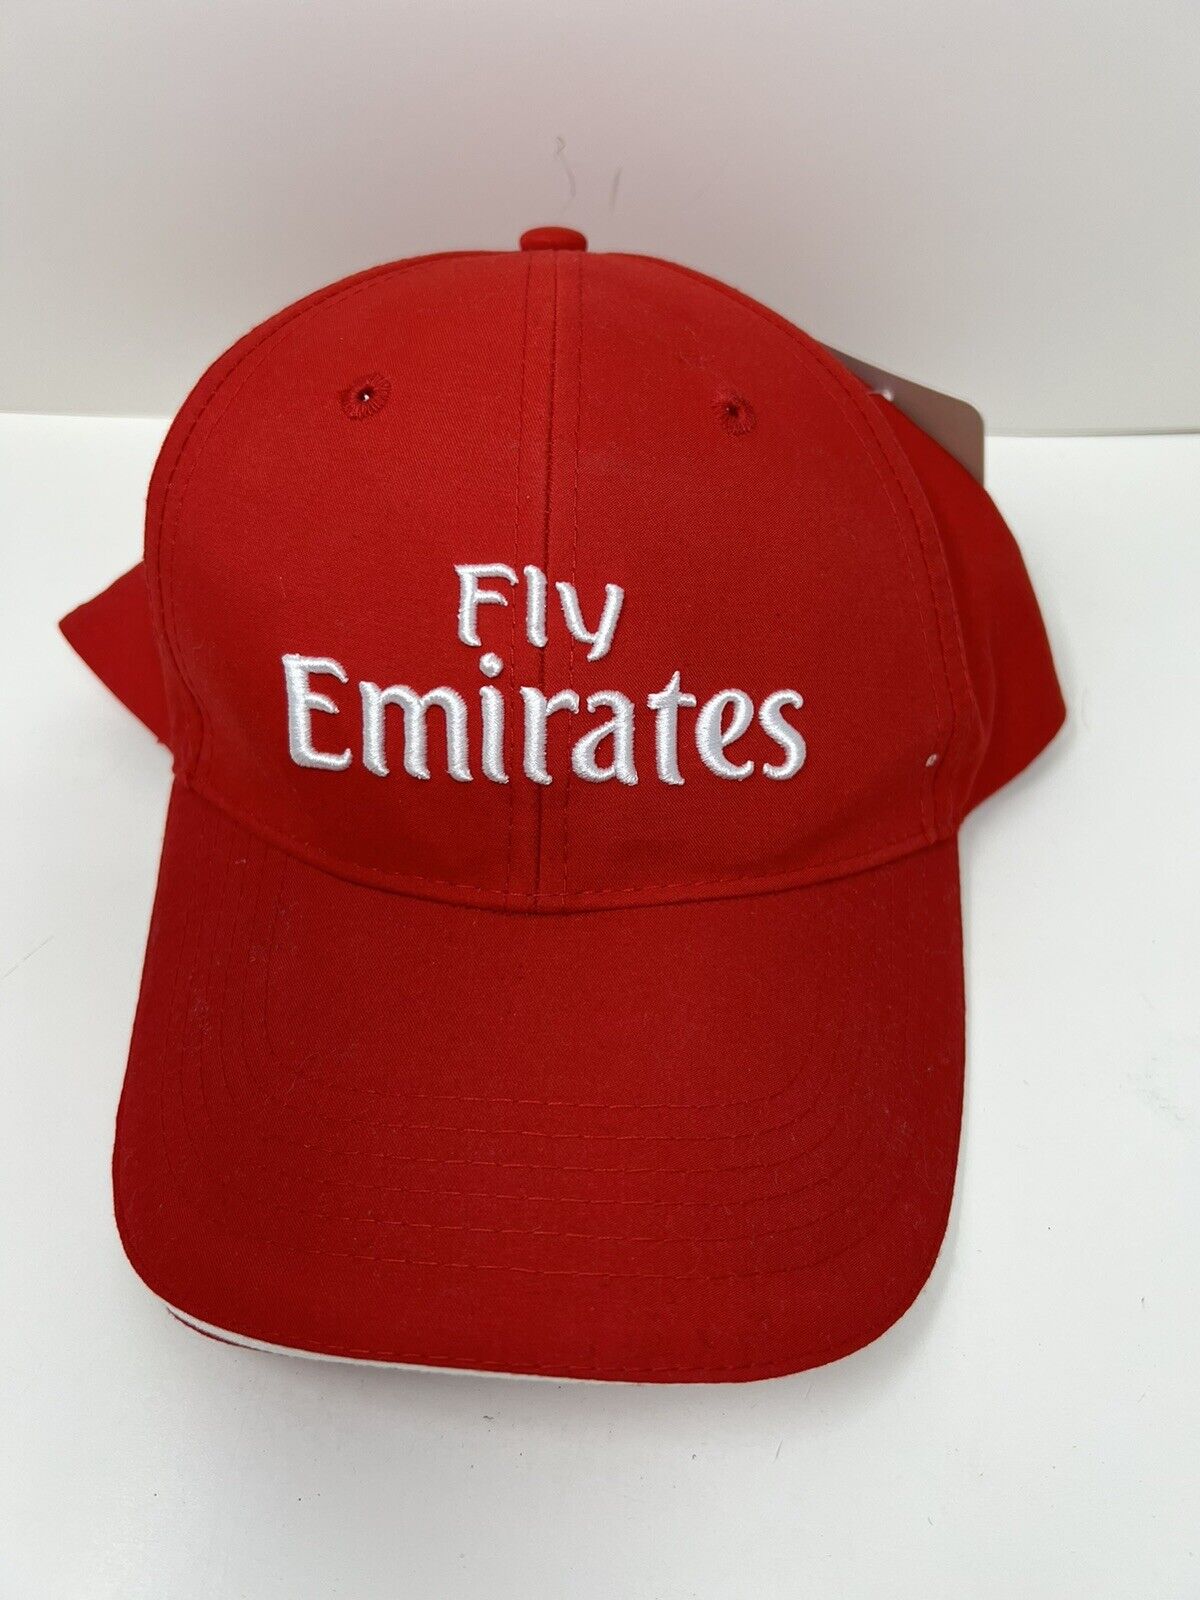 NWT EMIRATES AIRLINES Fly Emirates Logo Adjustable Hat Microfibre